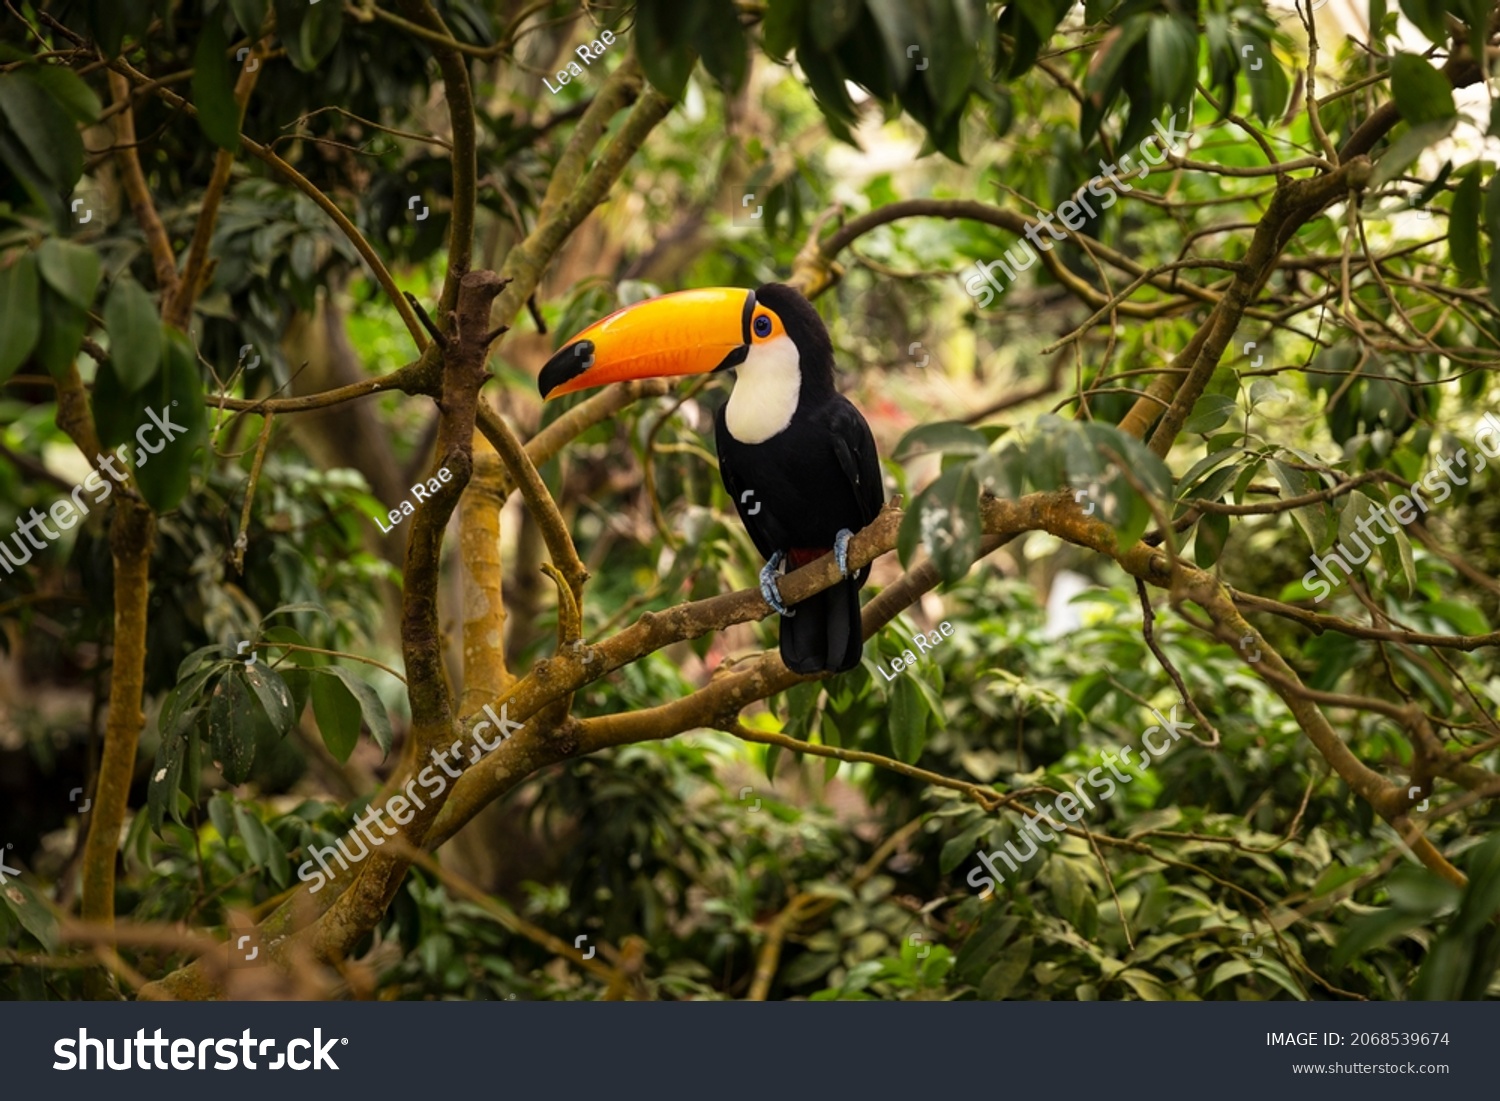 Toucan tropical exotic bird from the rainforest with its iconic yellow orange beak sitting on the branch of a tree surrounded by greenery #2068539674